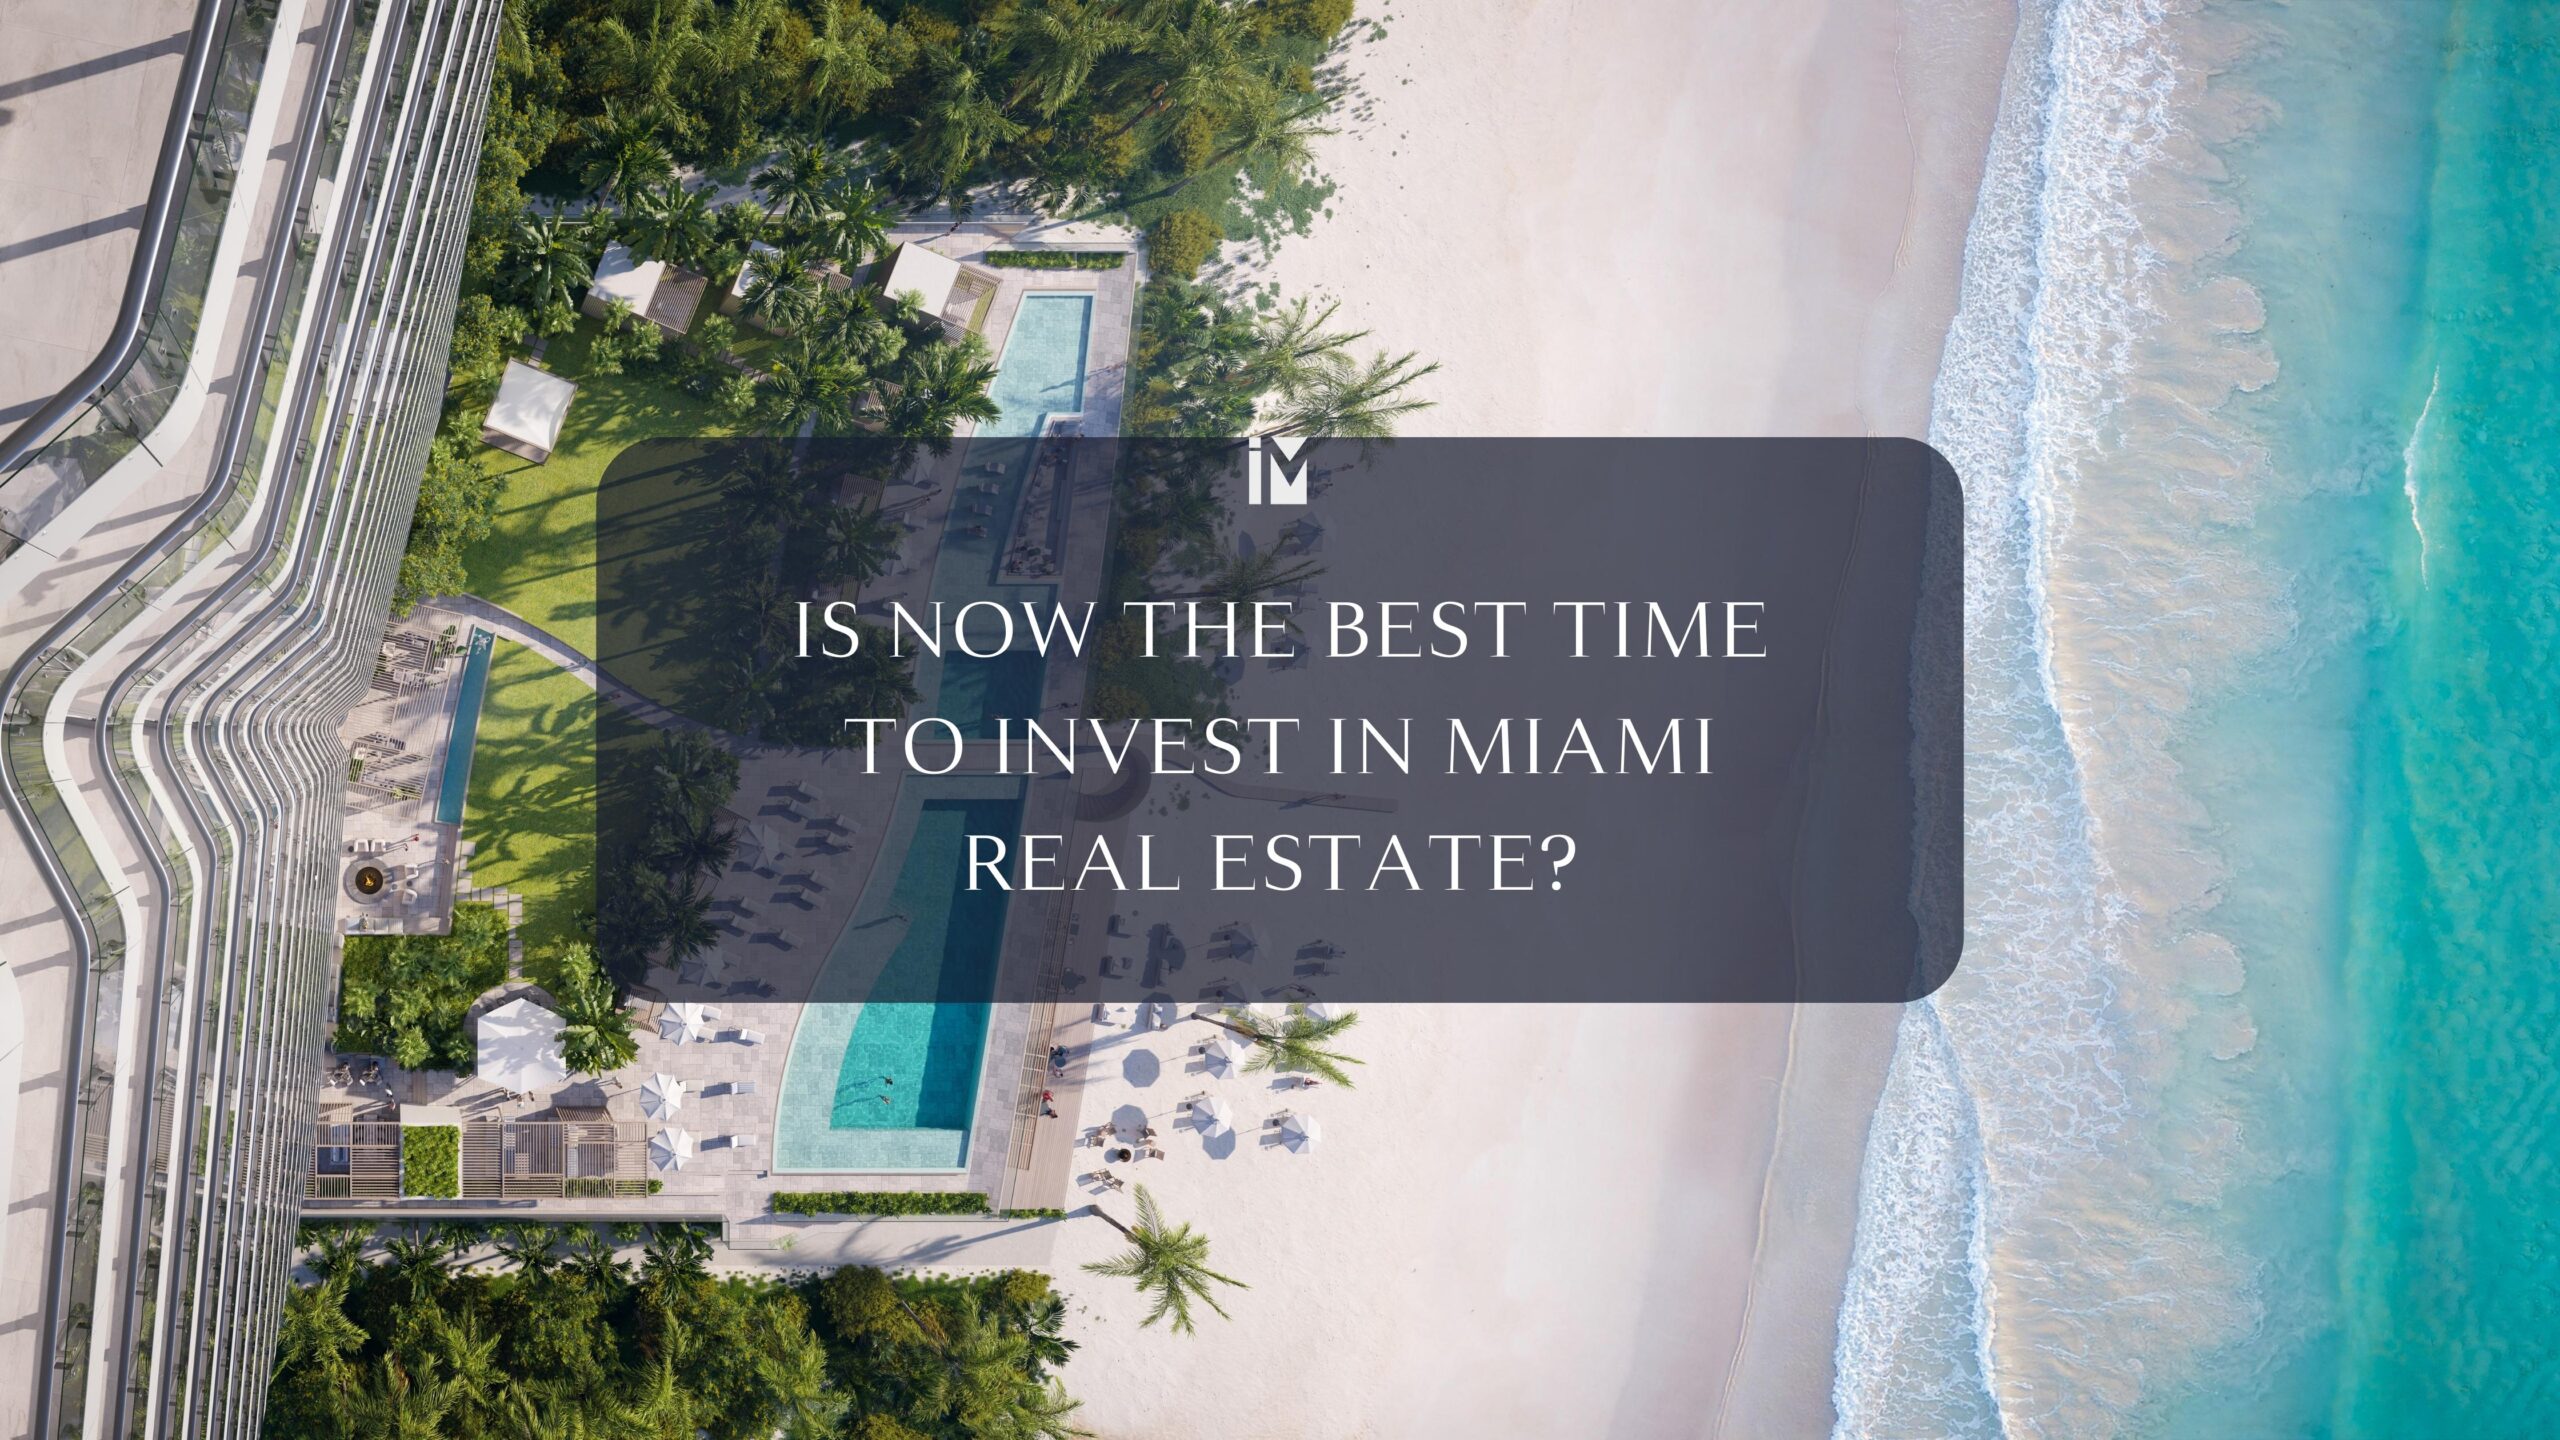 The Miami Real Estate Boom: Reasons To Buy Now